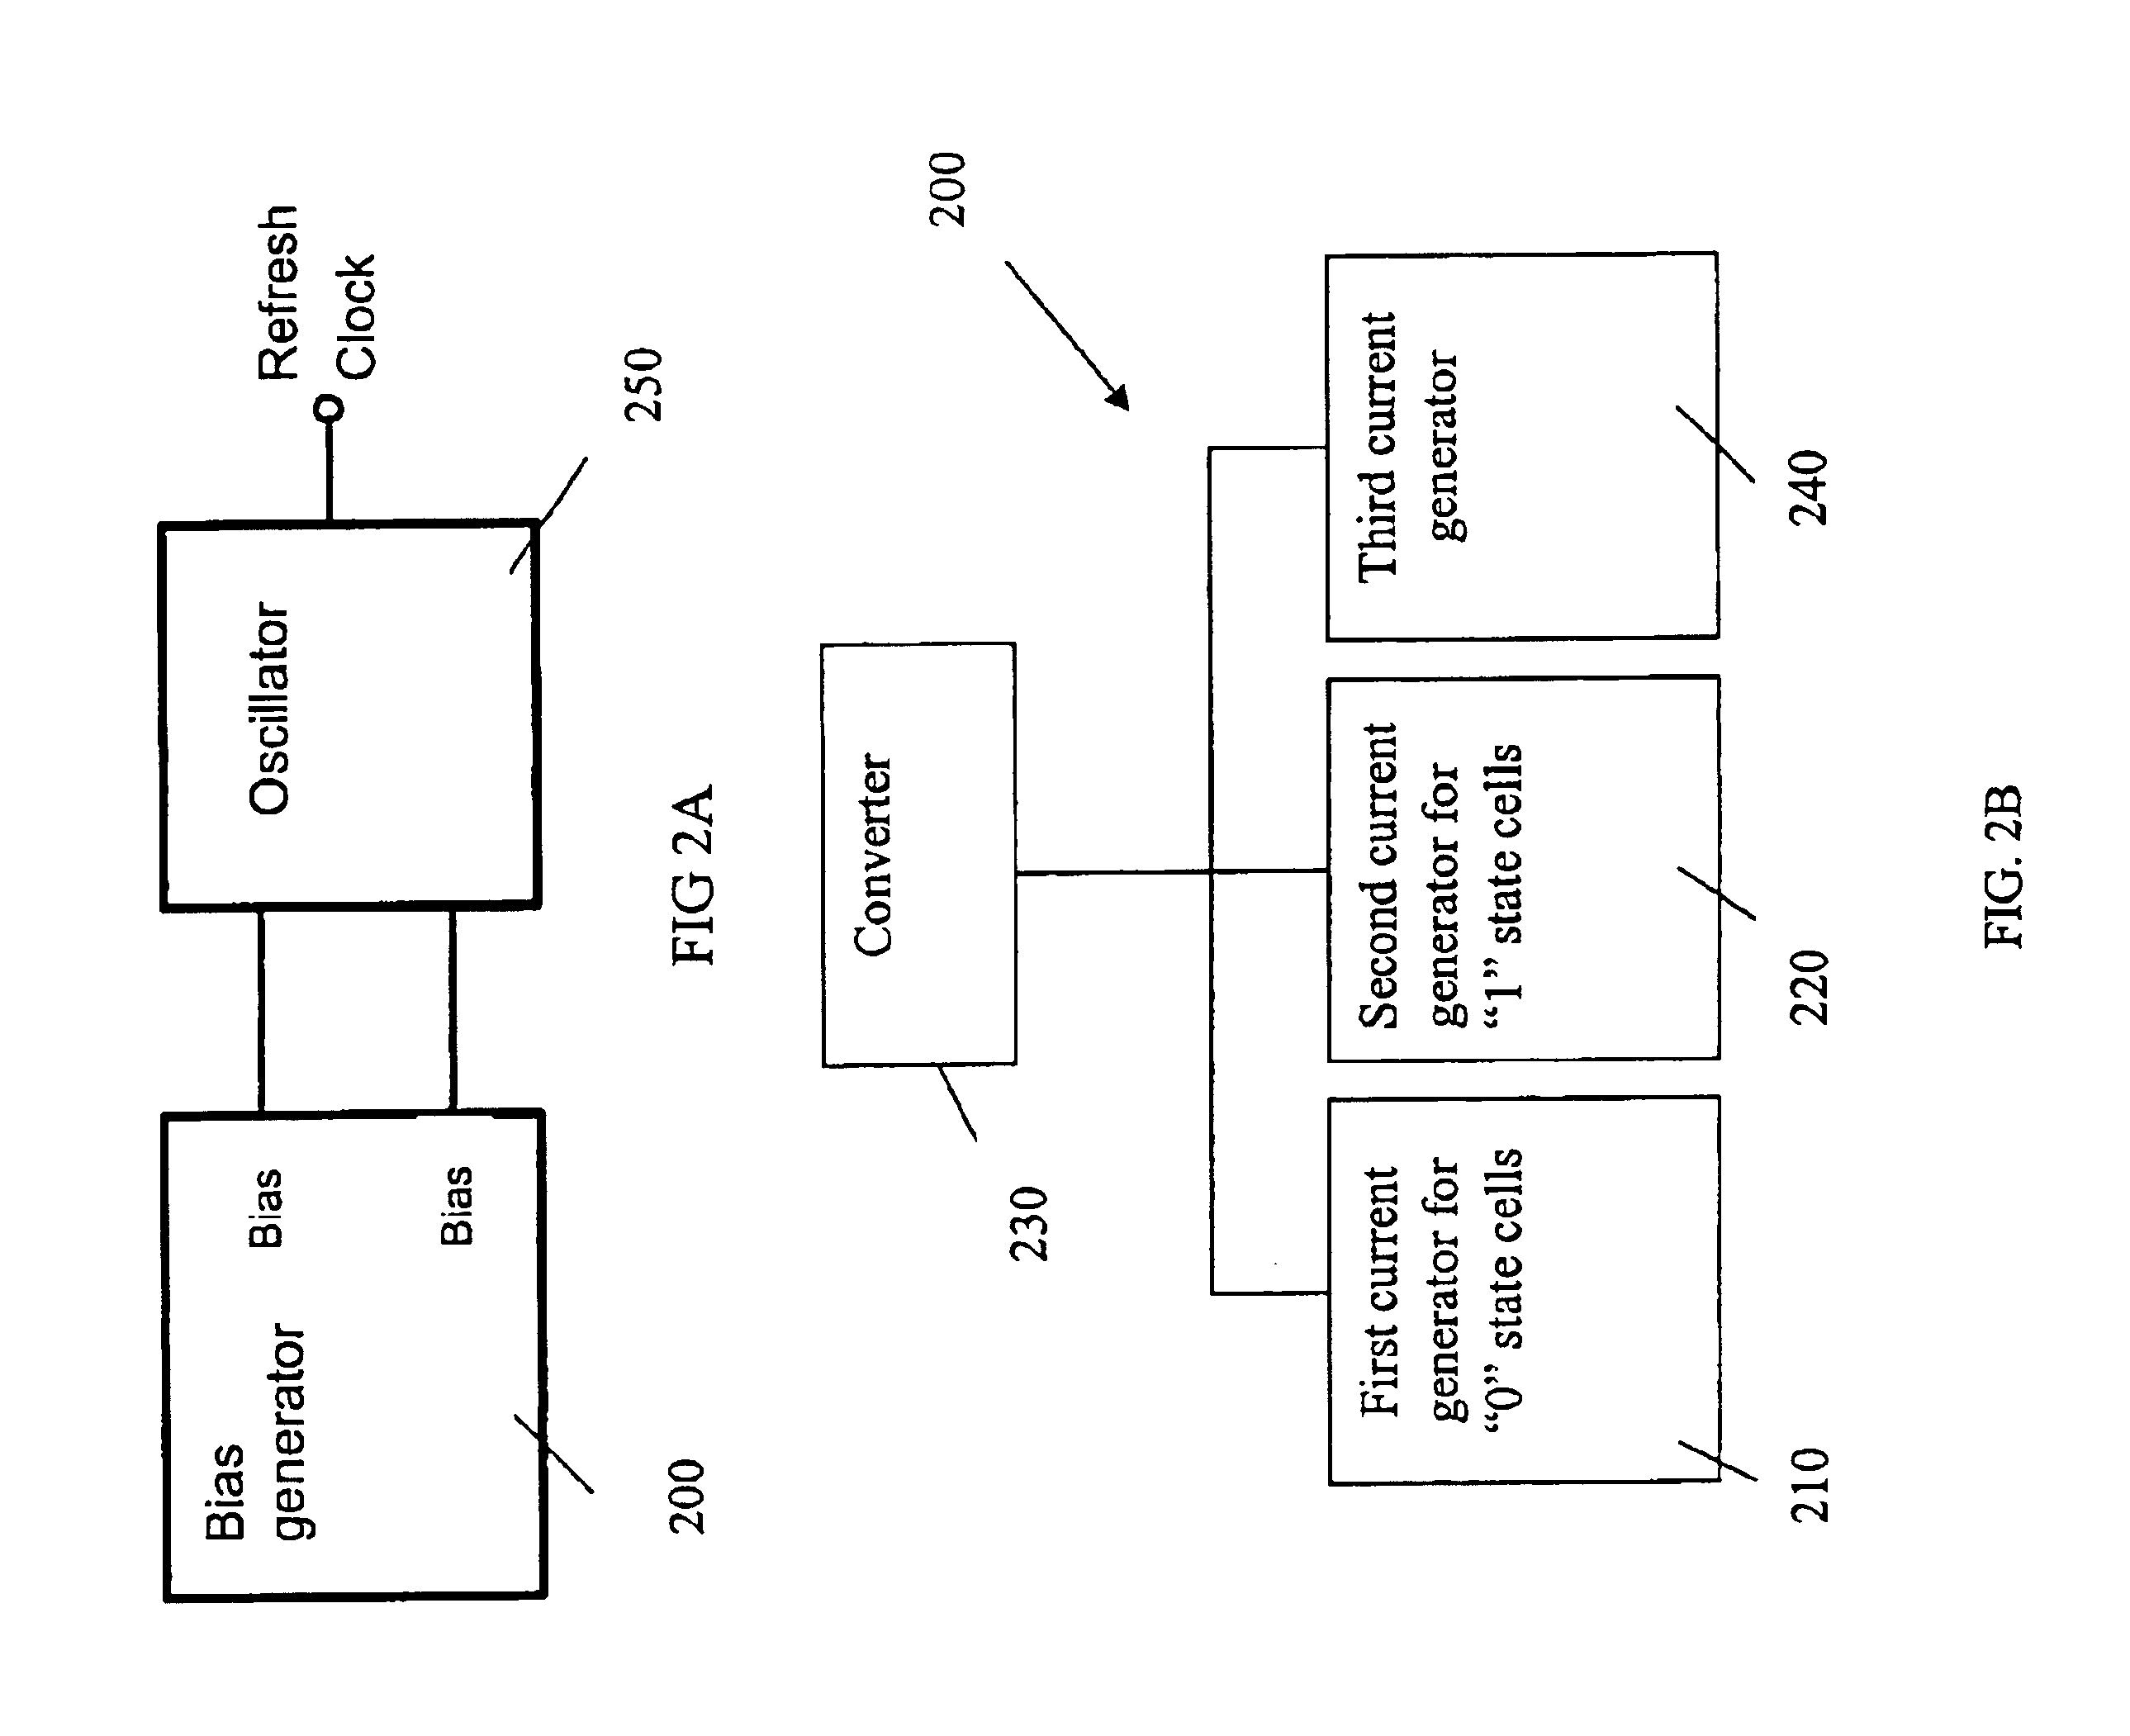 Circuit and method for self-refresh of DRAM cells through monitoring of cell leakage currents